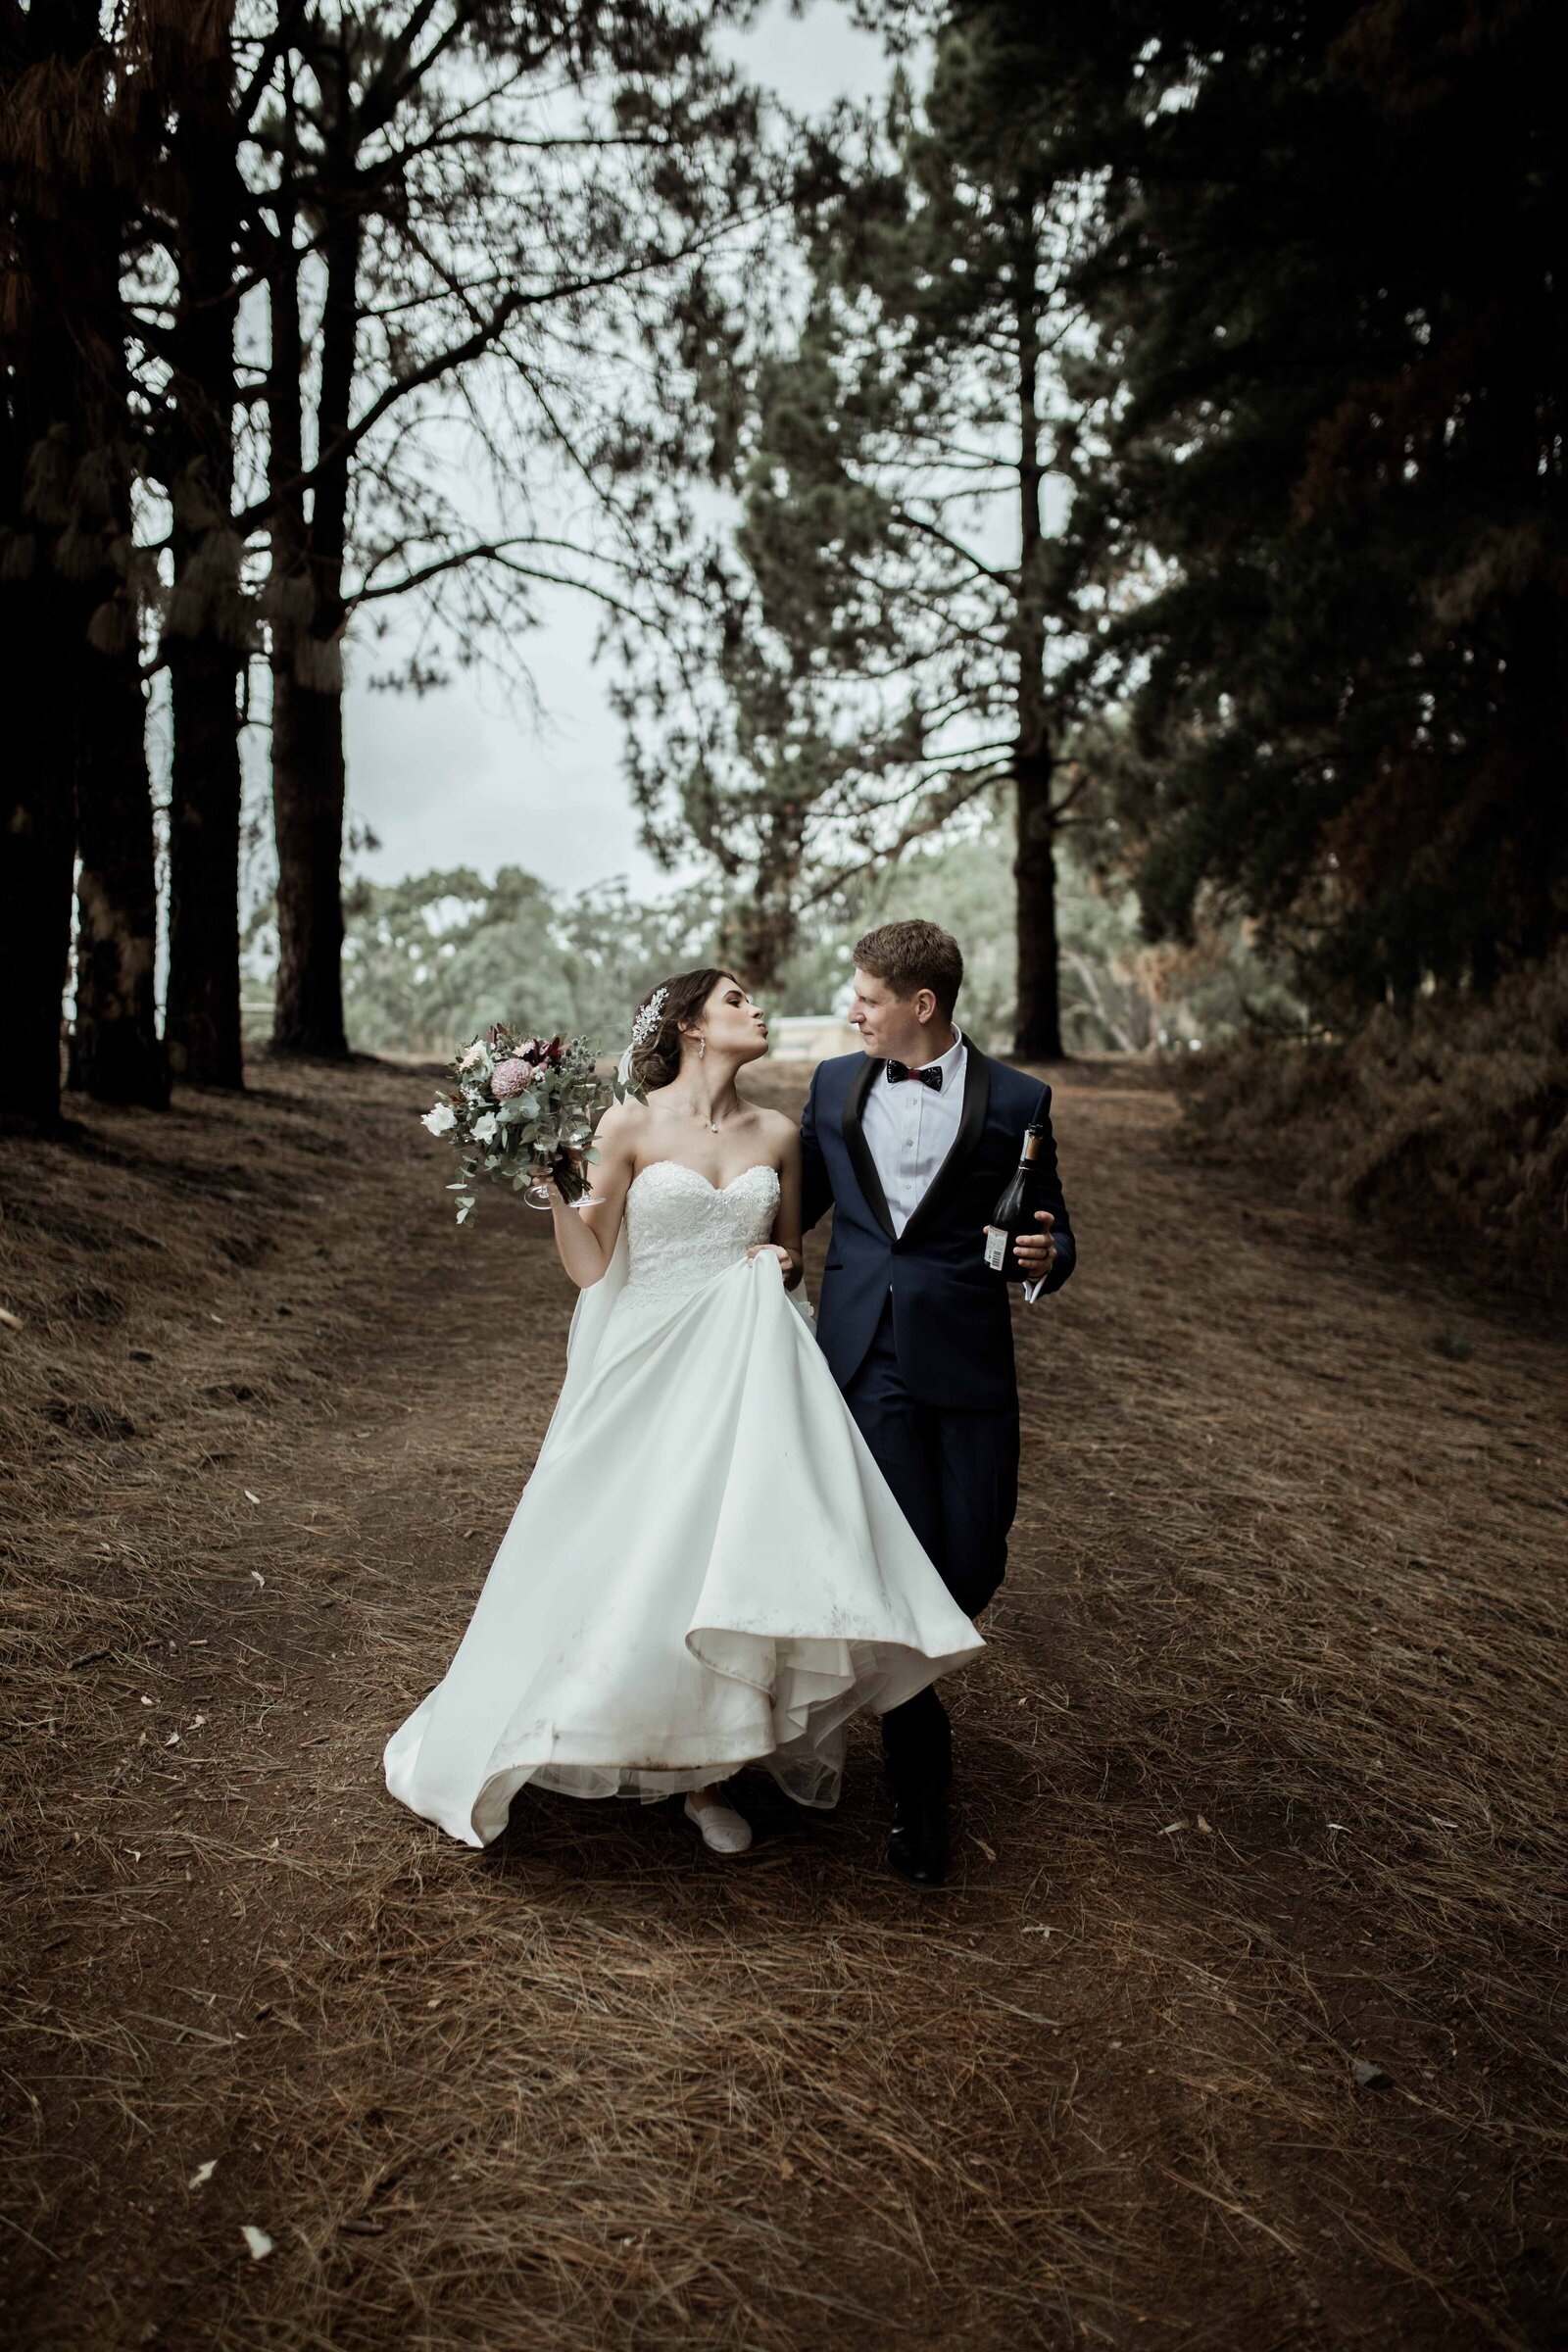 M&R-Anderson-Hill-Rexvil-Photography-Adelaide-Wedding-Photographer-549